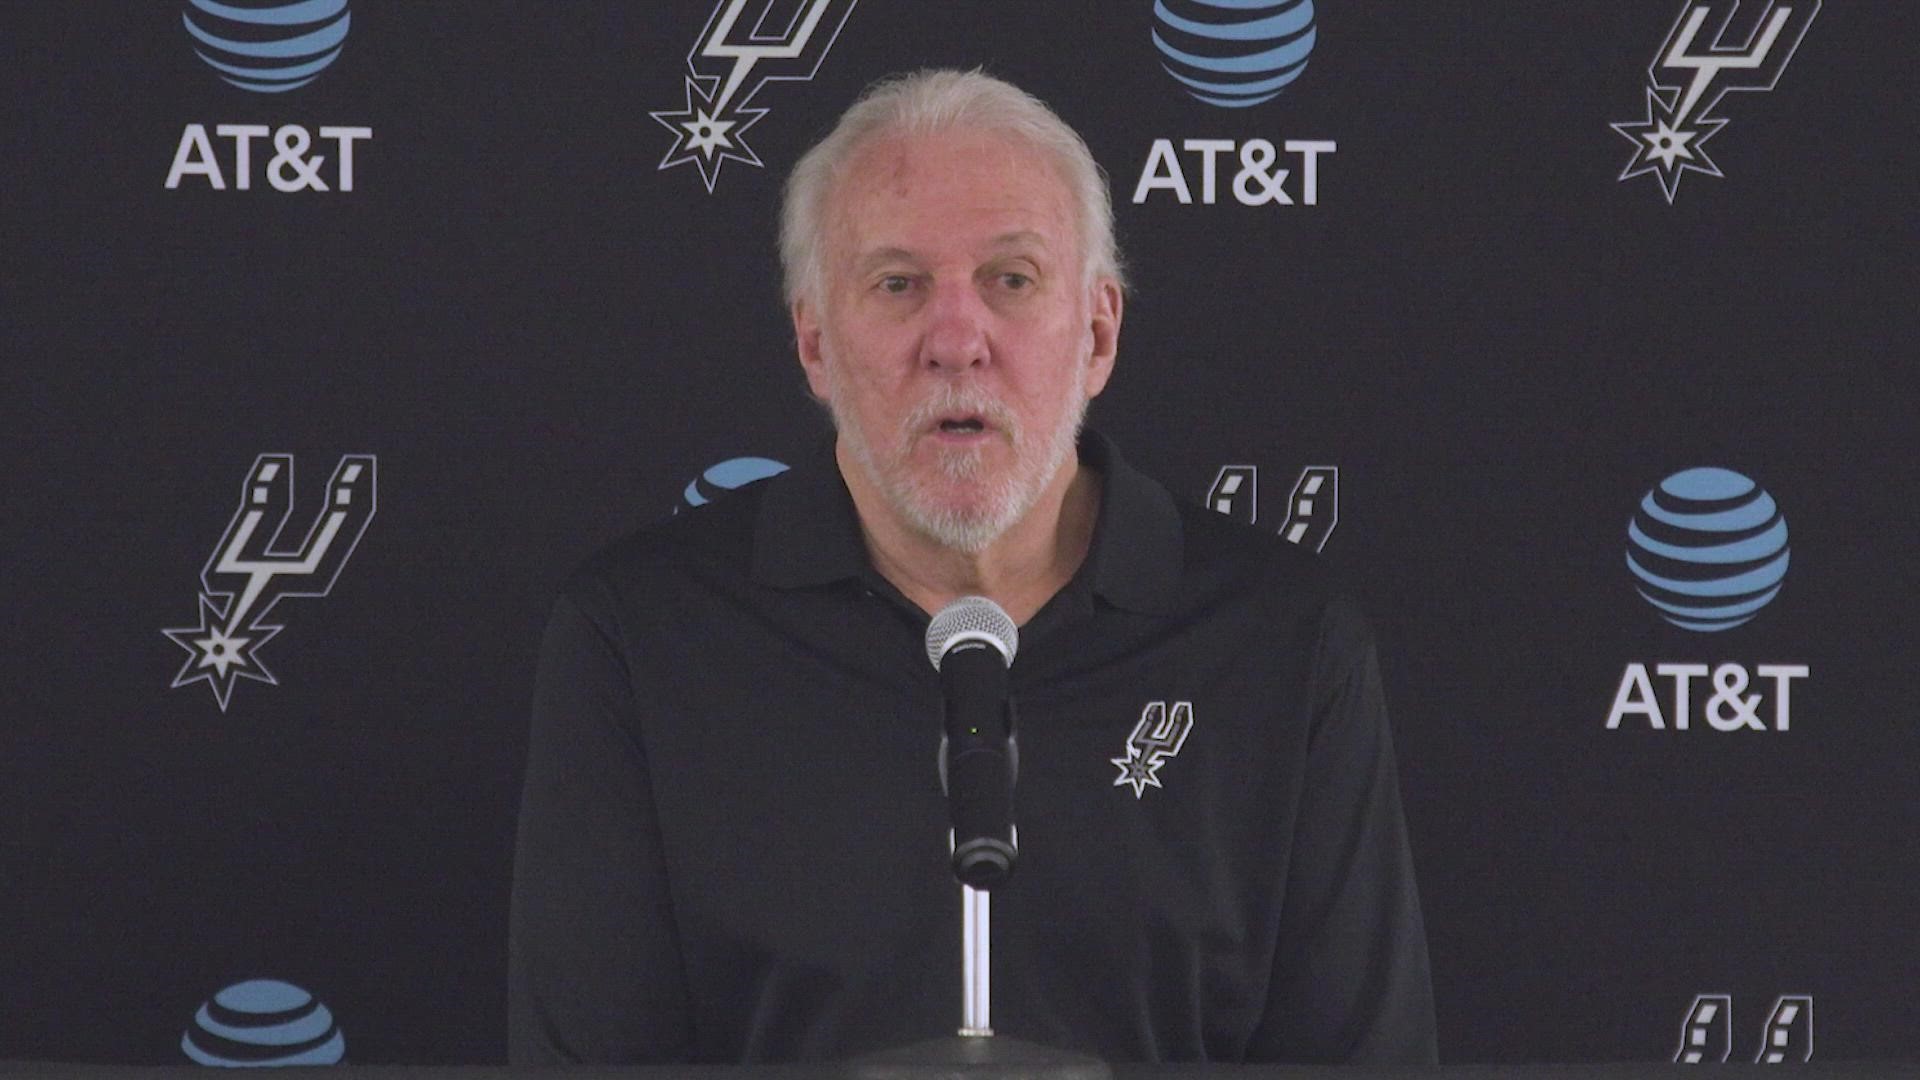 "Inside your body it's the same, you still get butterflies, still feel that competitive sort of nervousness before a game starts," Popovich said.